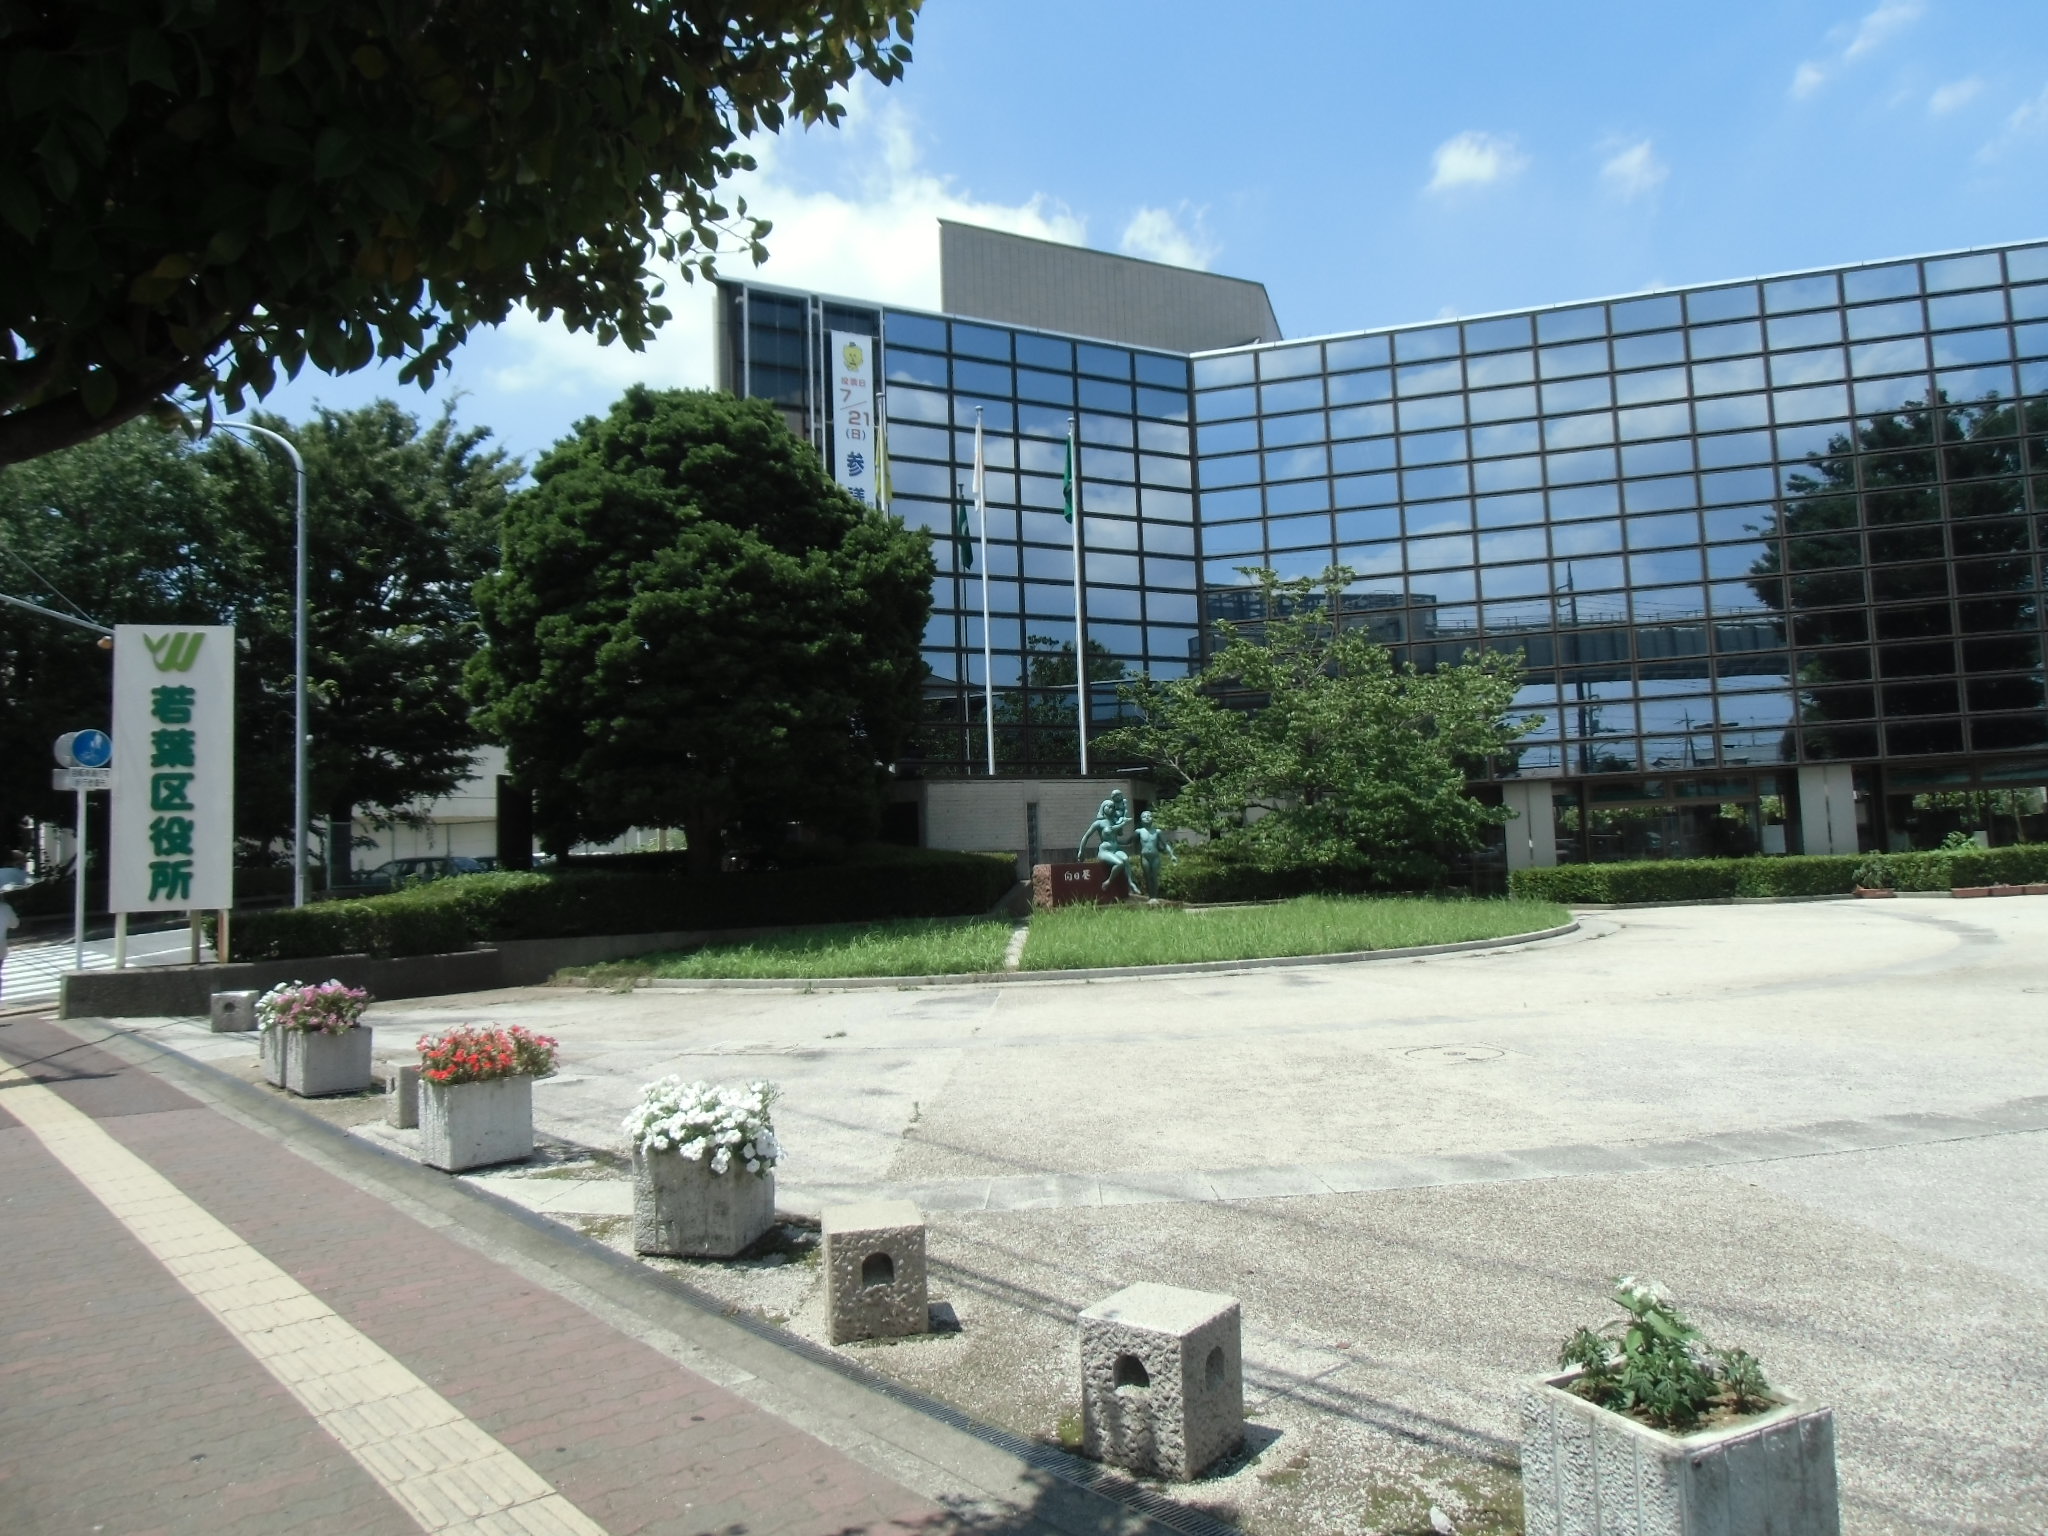 Government office. 483m to Chiba Wakaba Ward (government office)